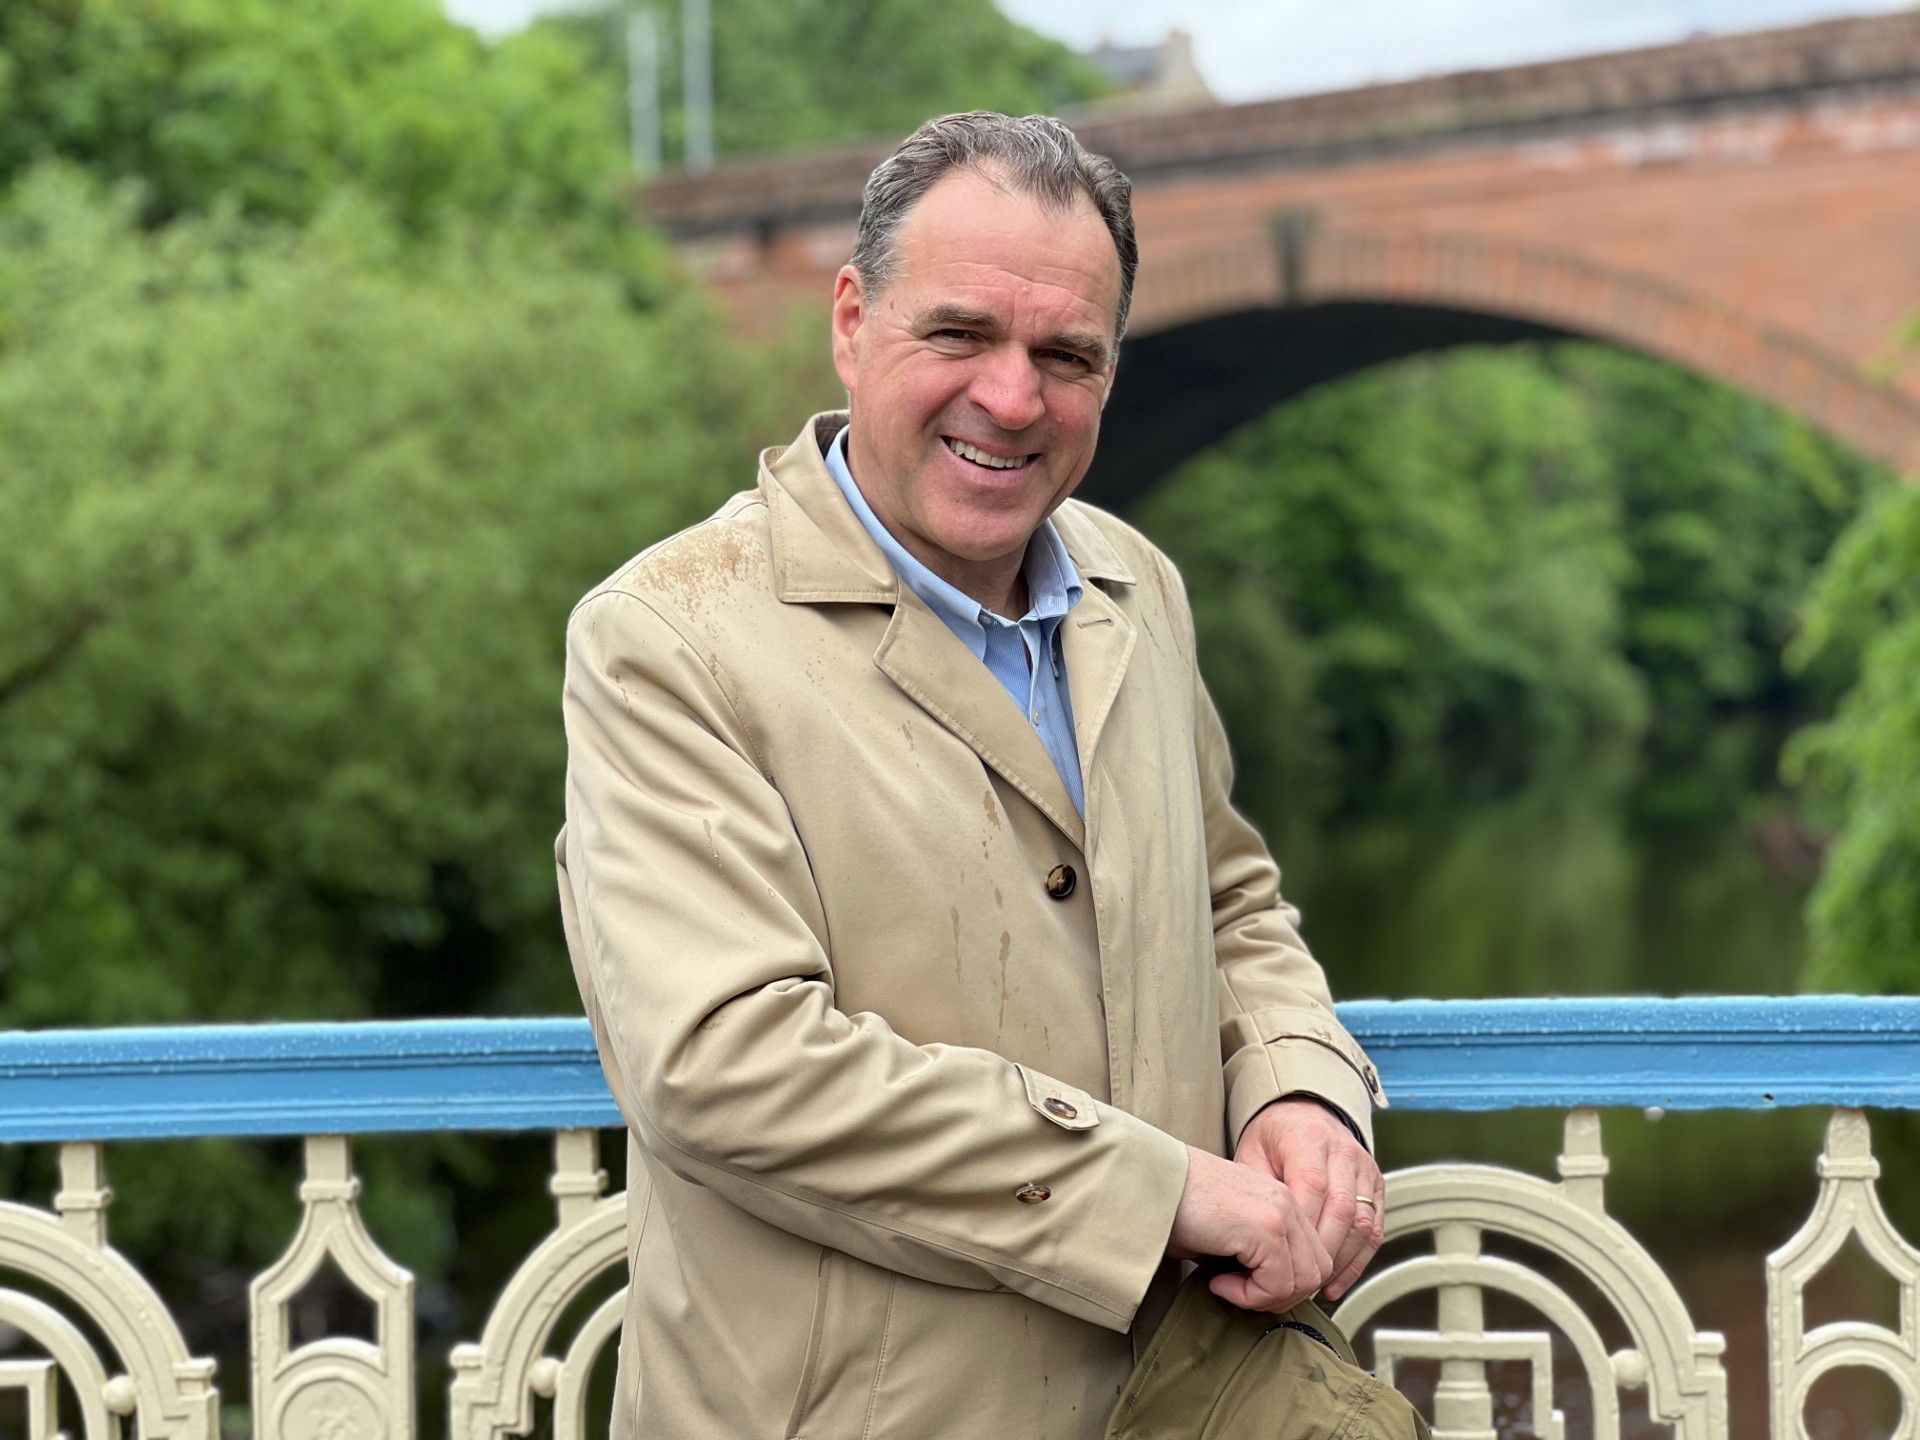 Professor Sir Niall Ferguson smiling, pictured with a bridge behind him